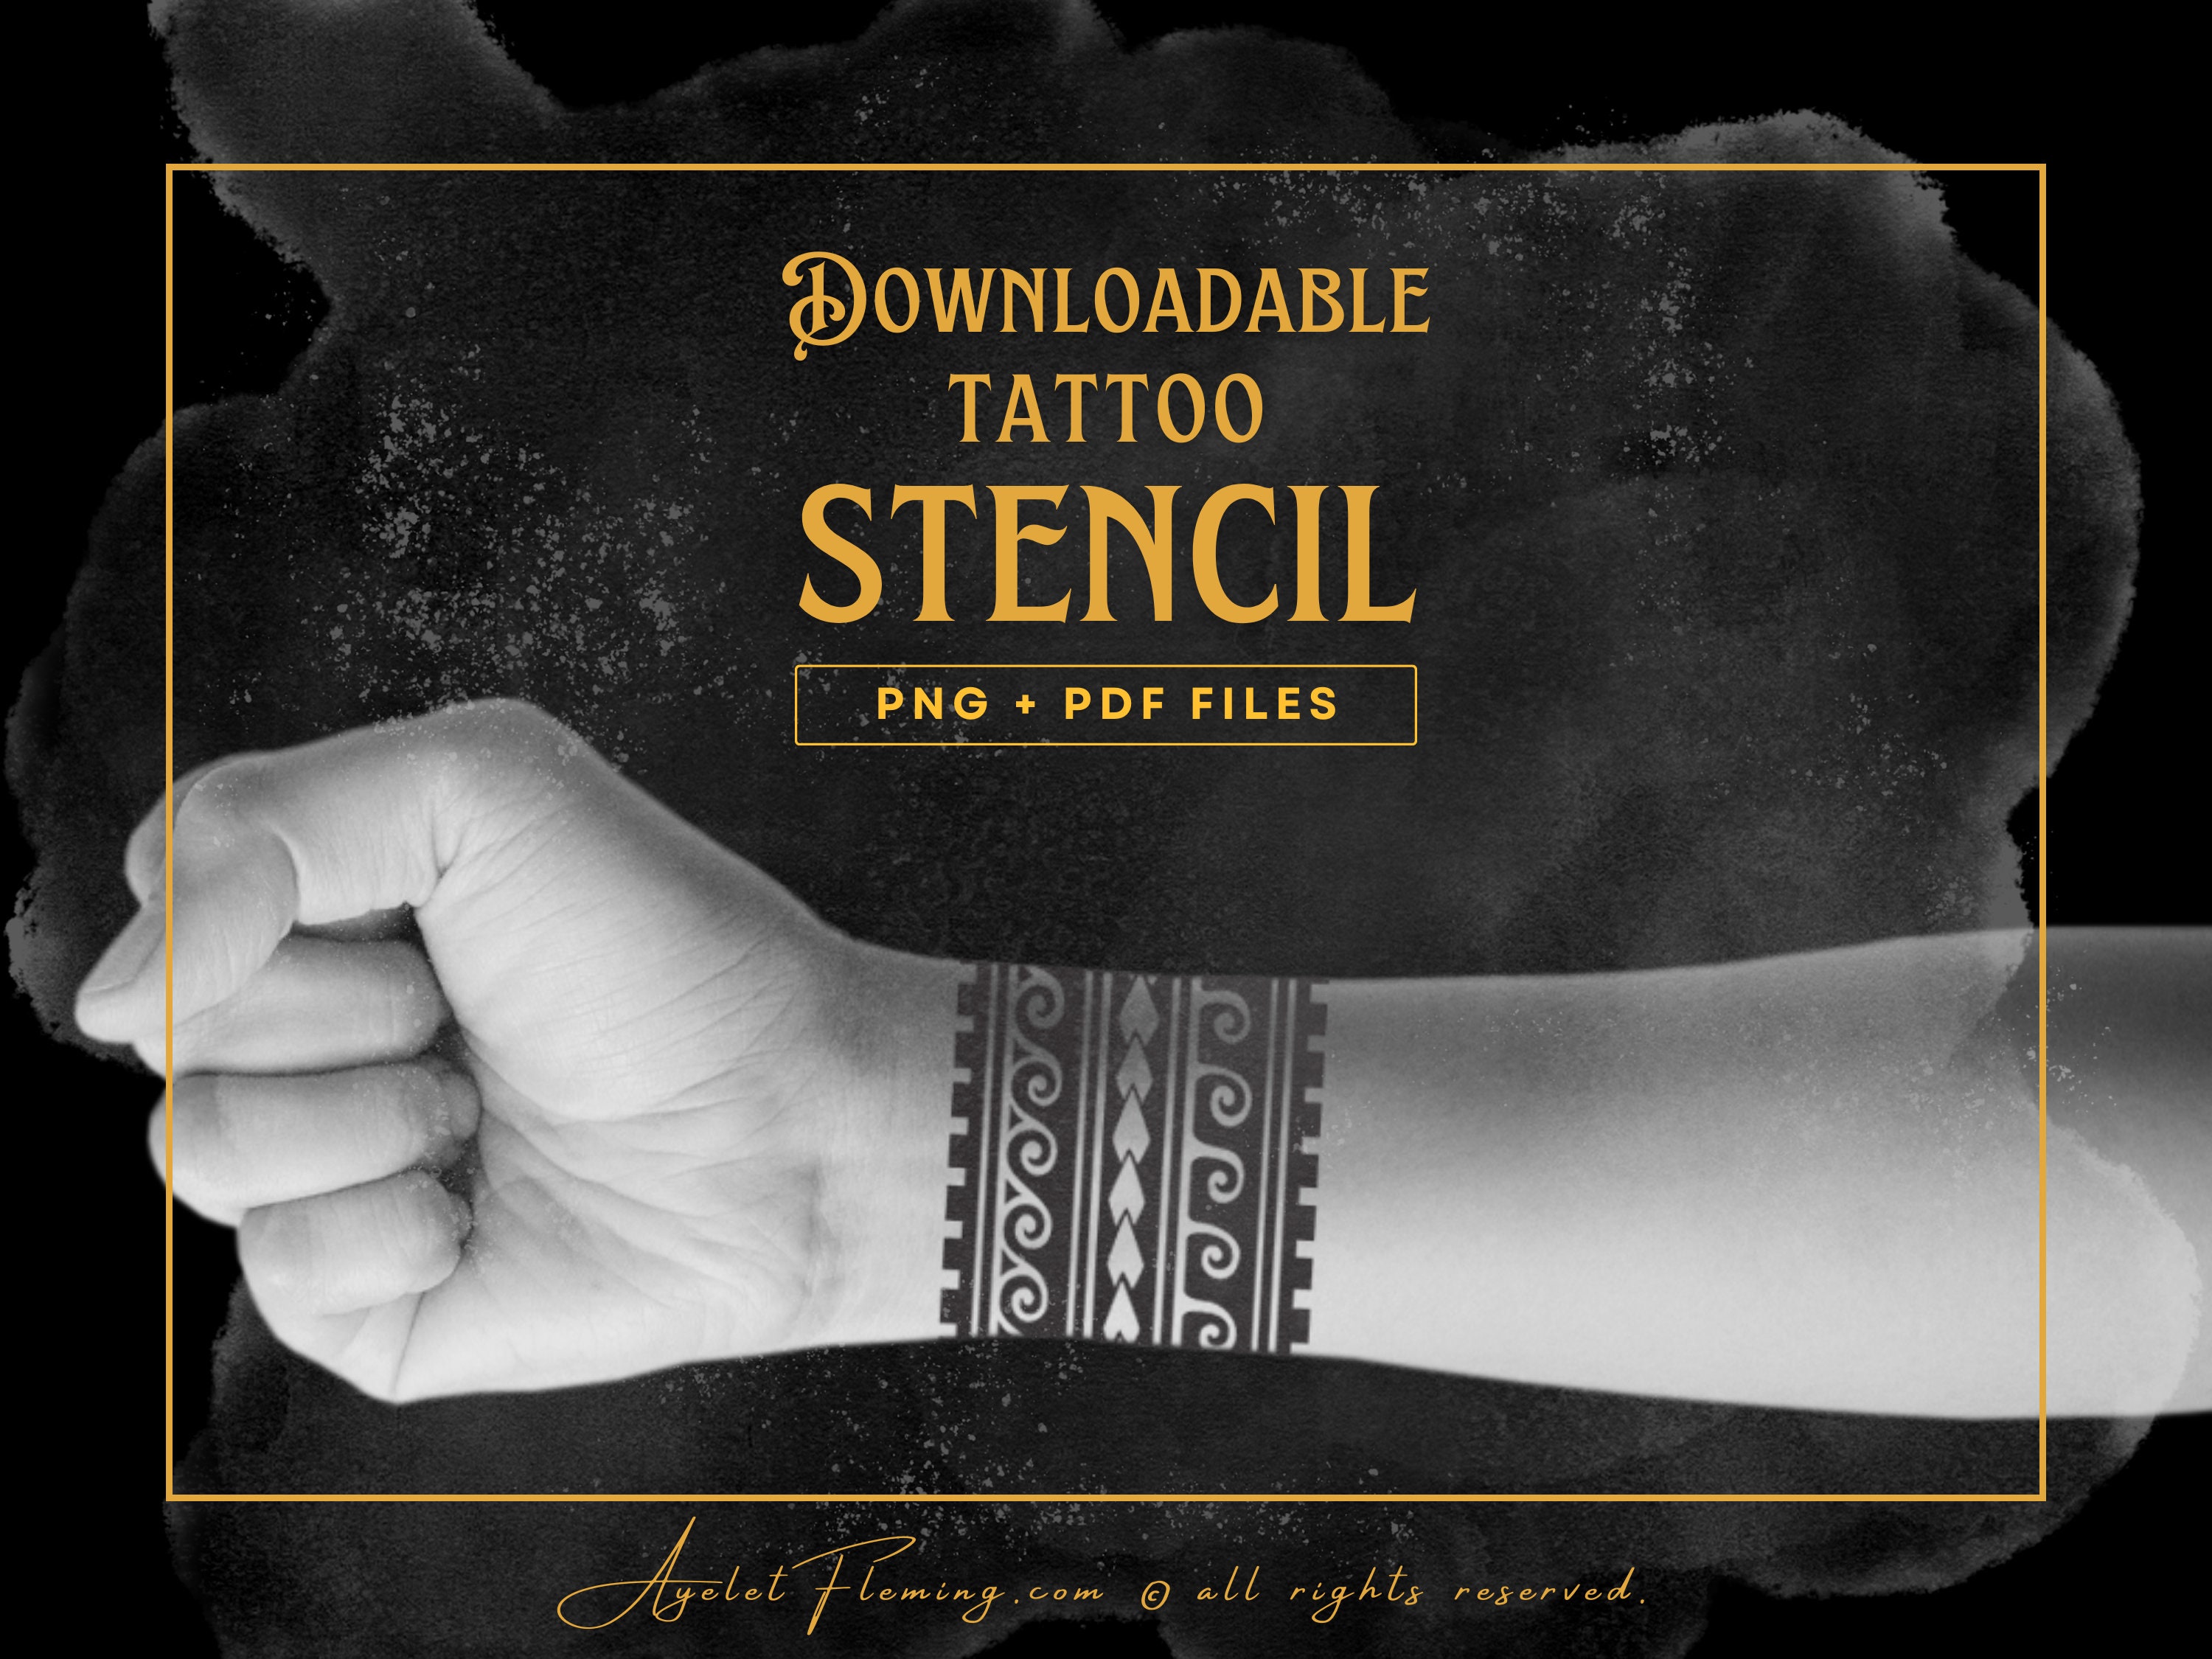 Image of tribal tattoo arm band Royalty Free Vector Image